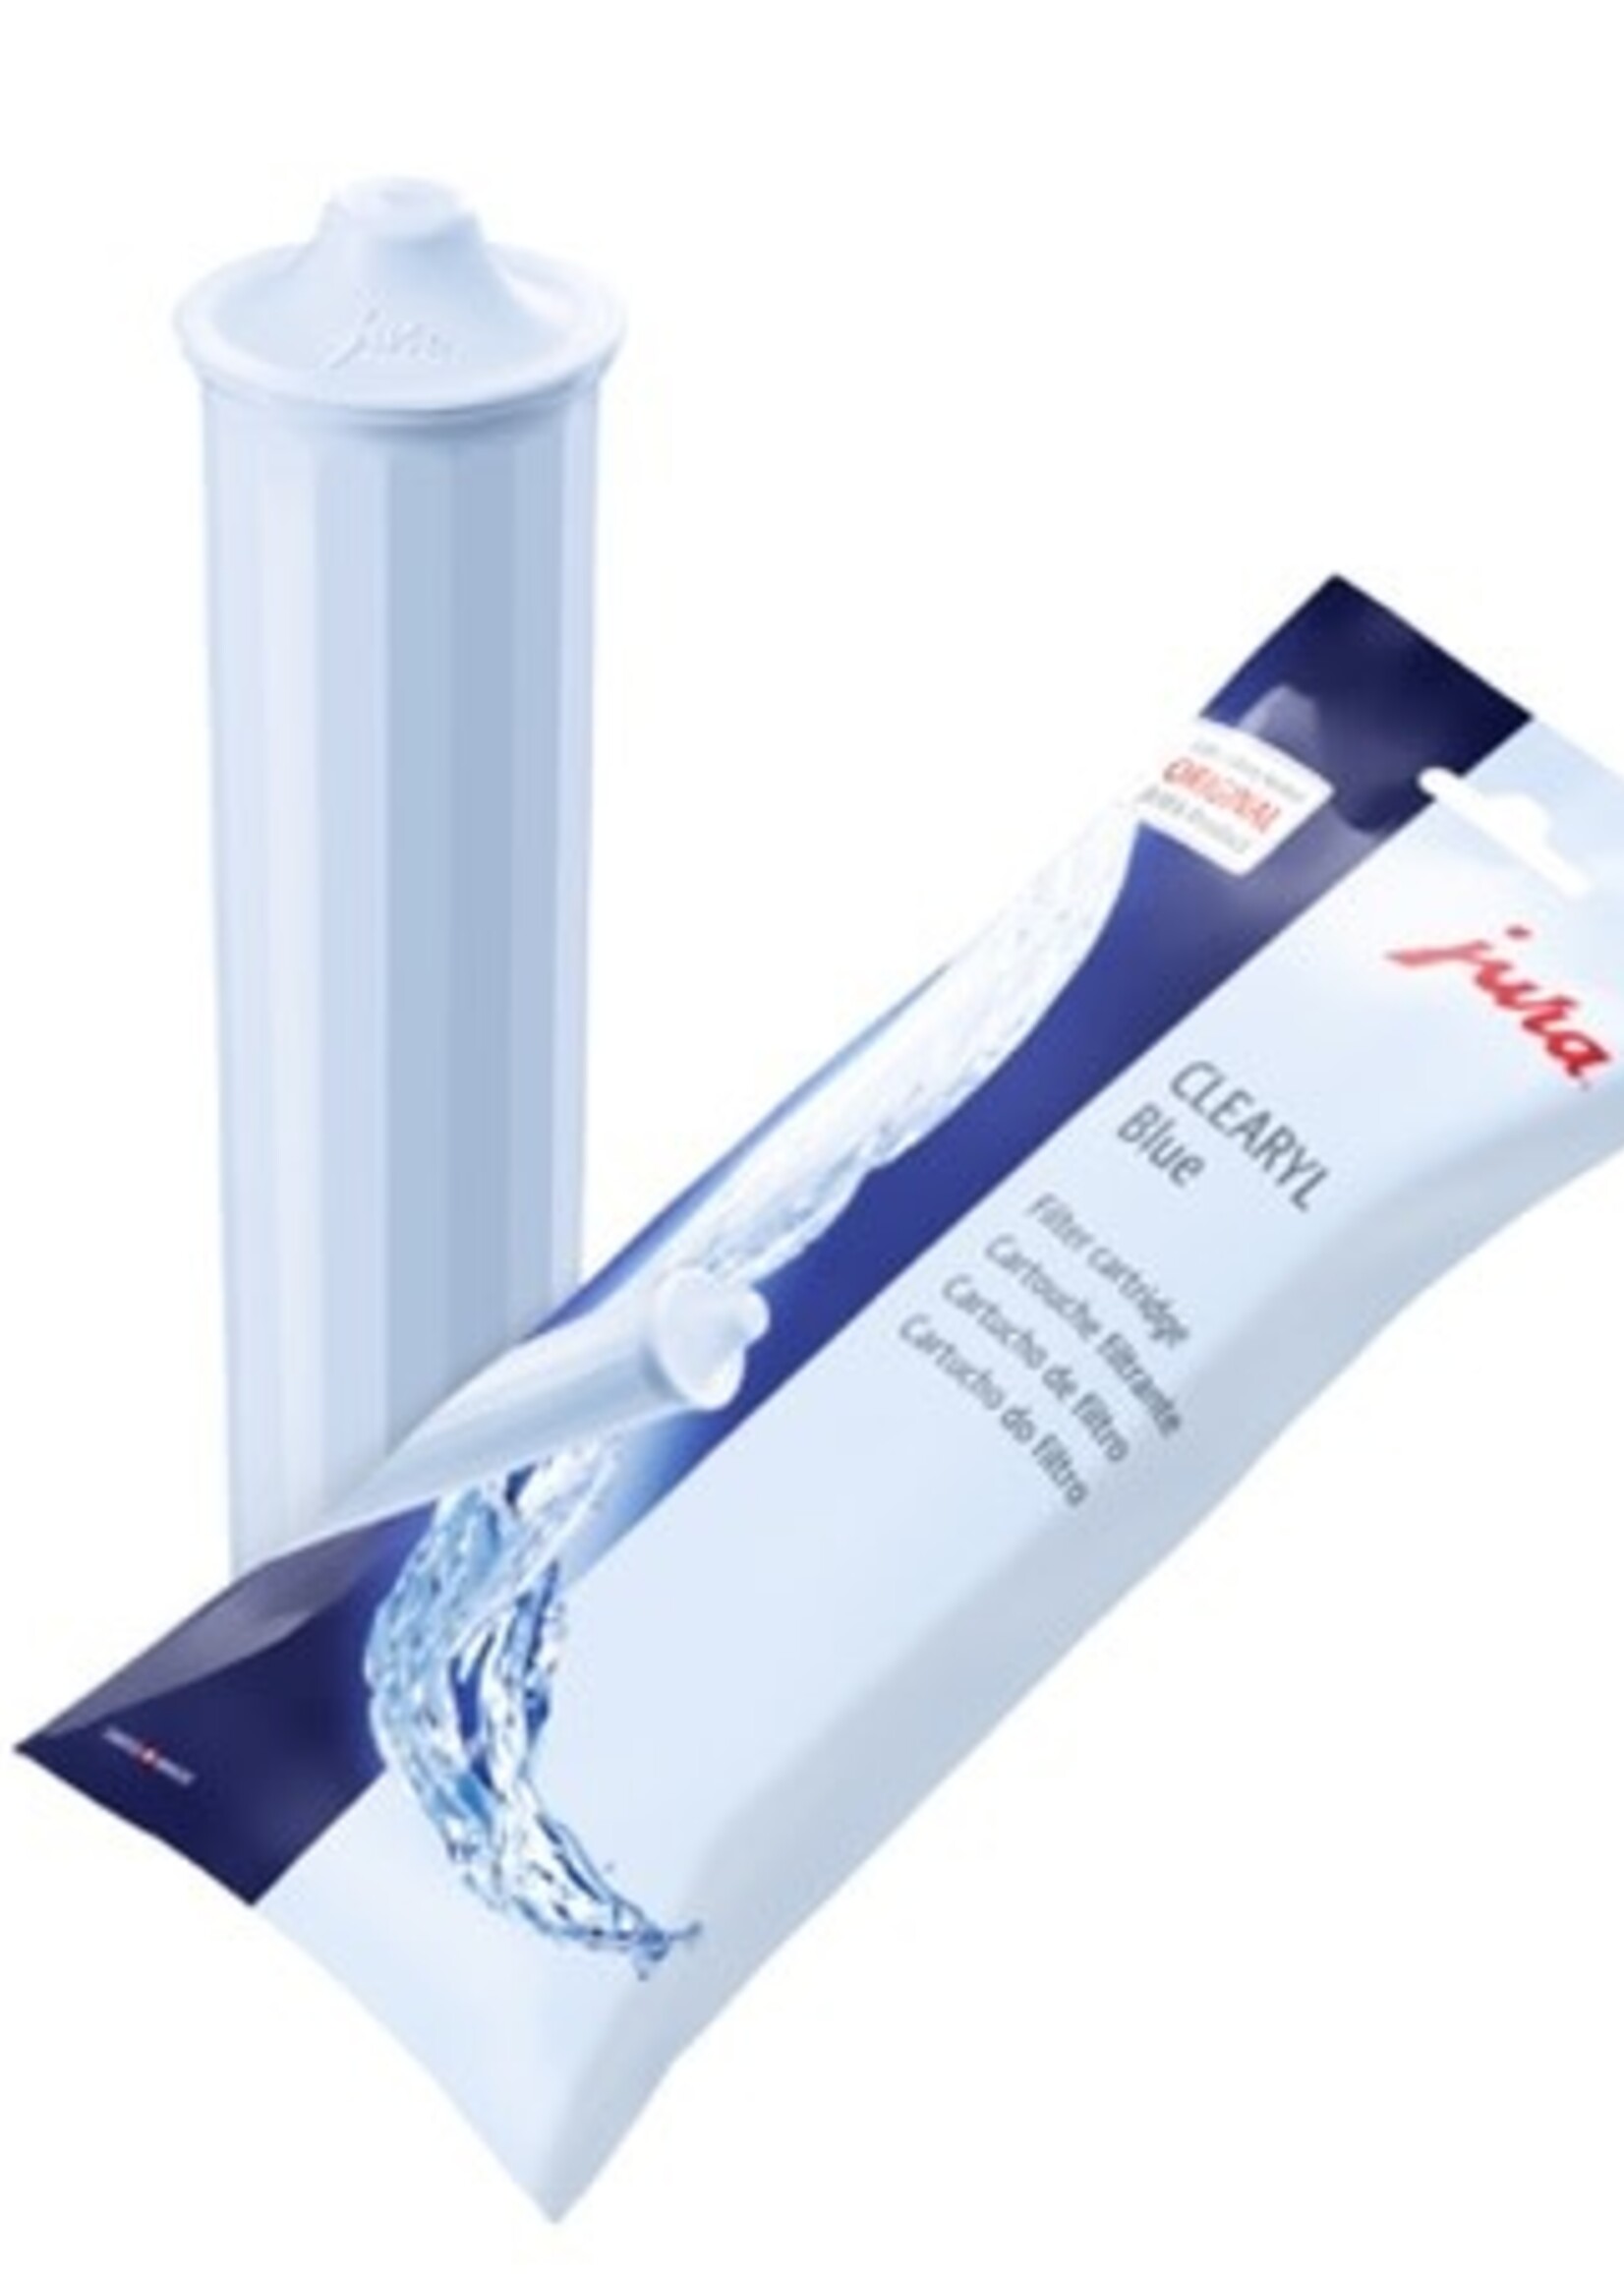 Jura Clearyl Blue Water Filter